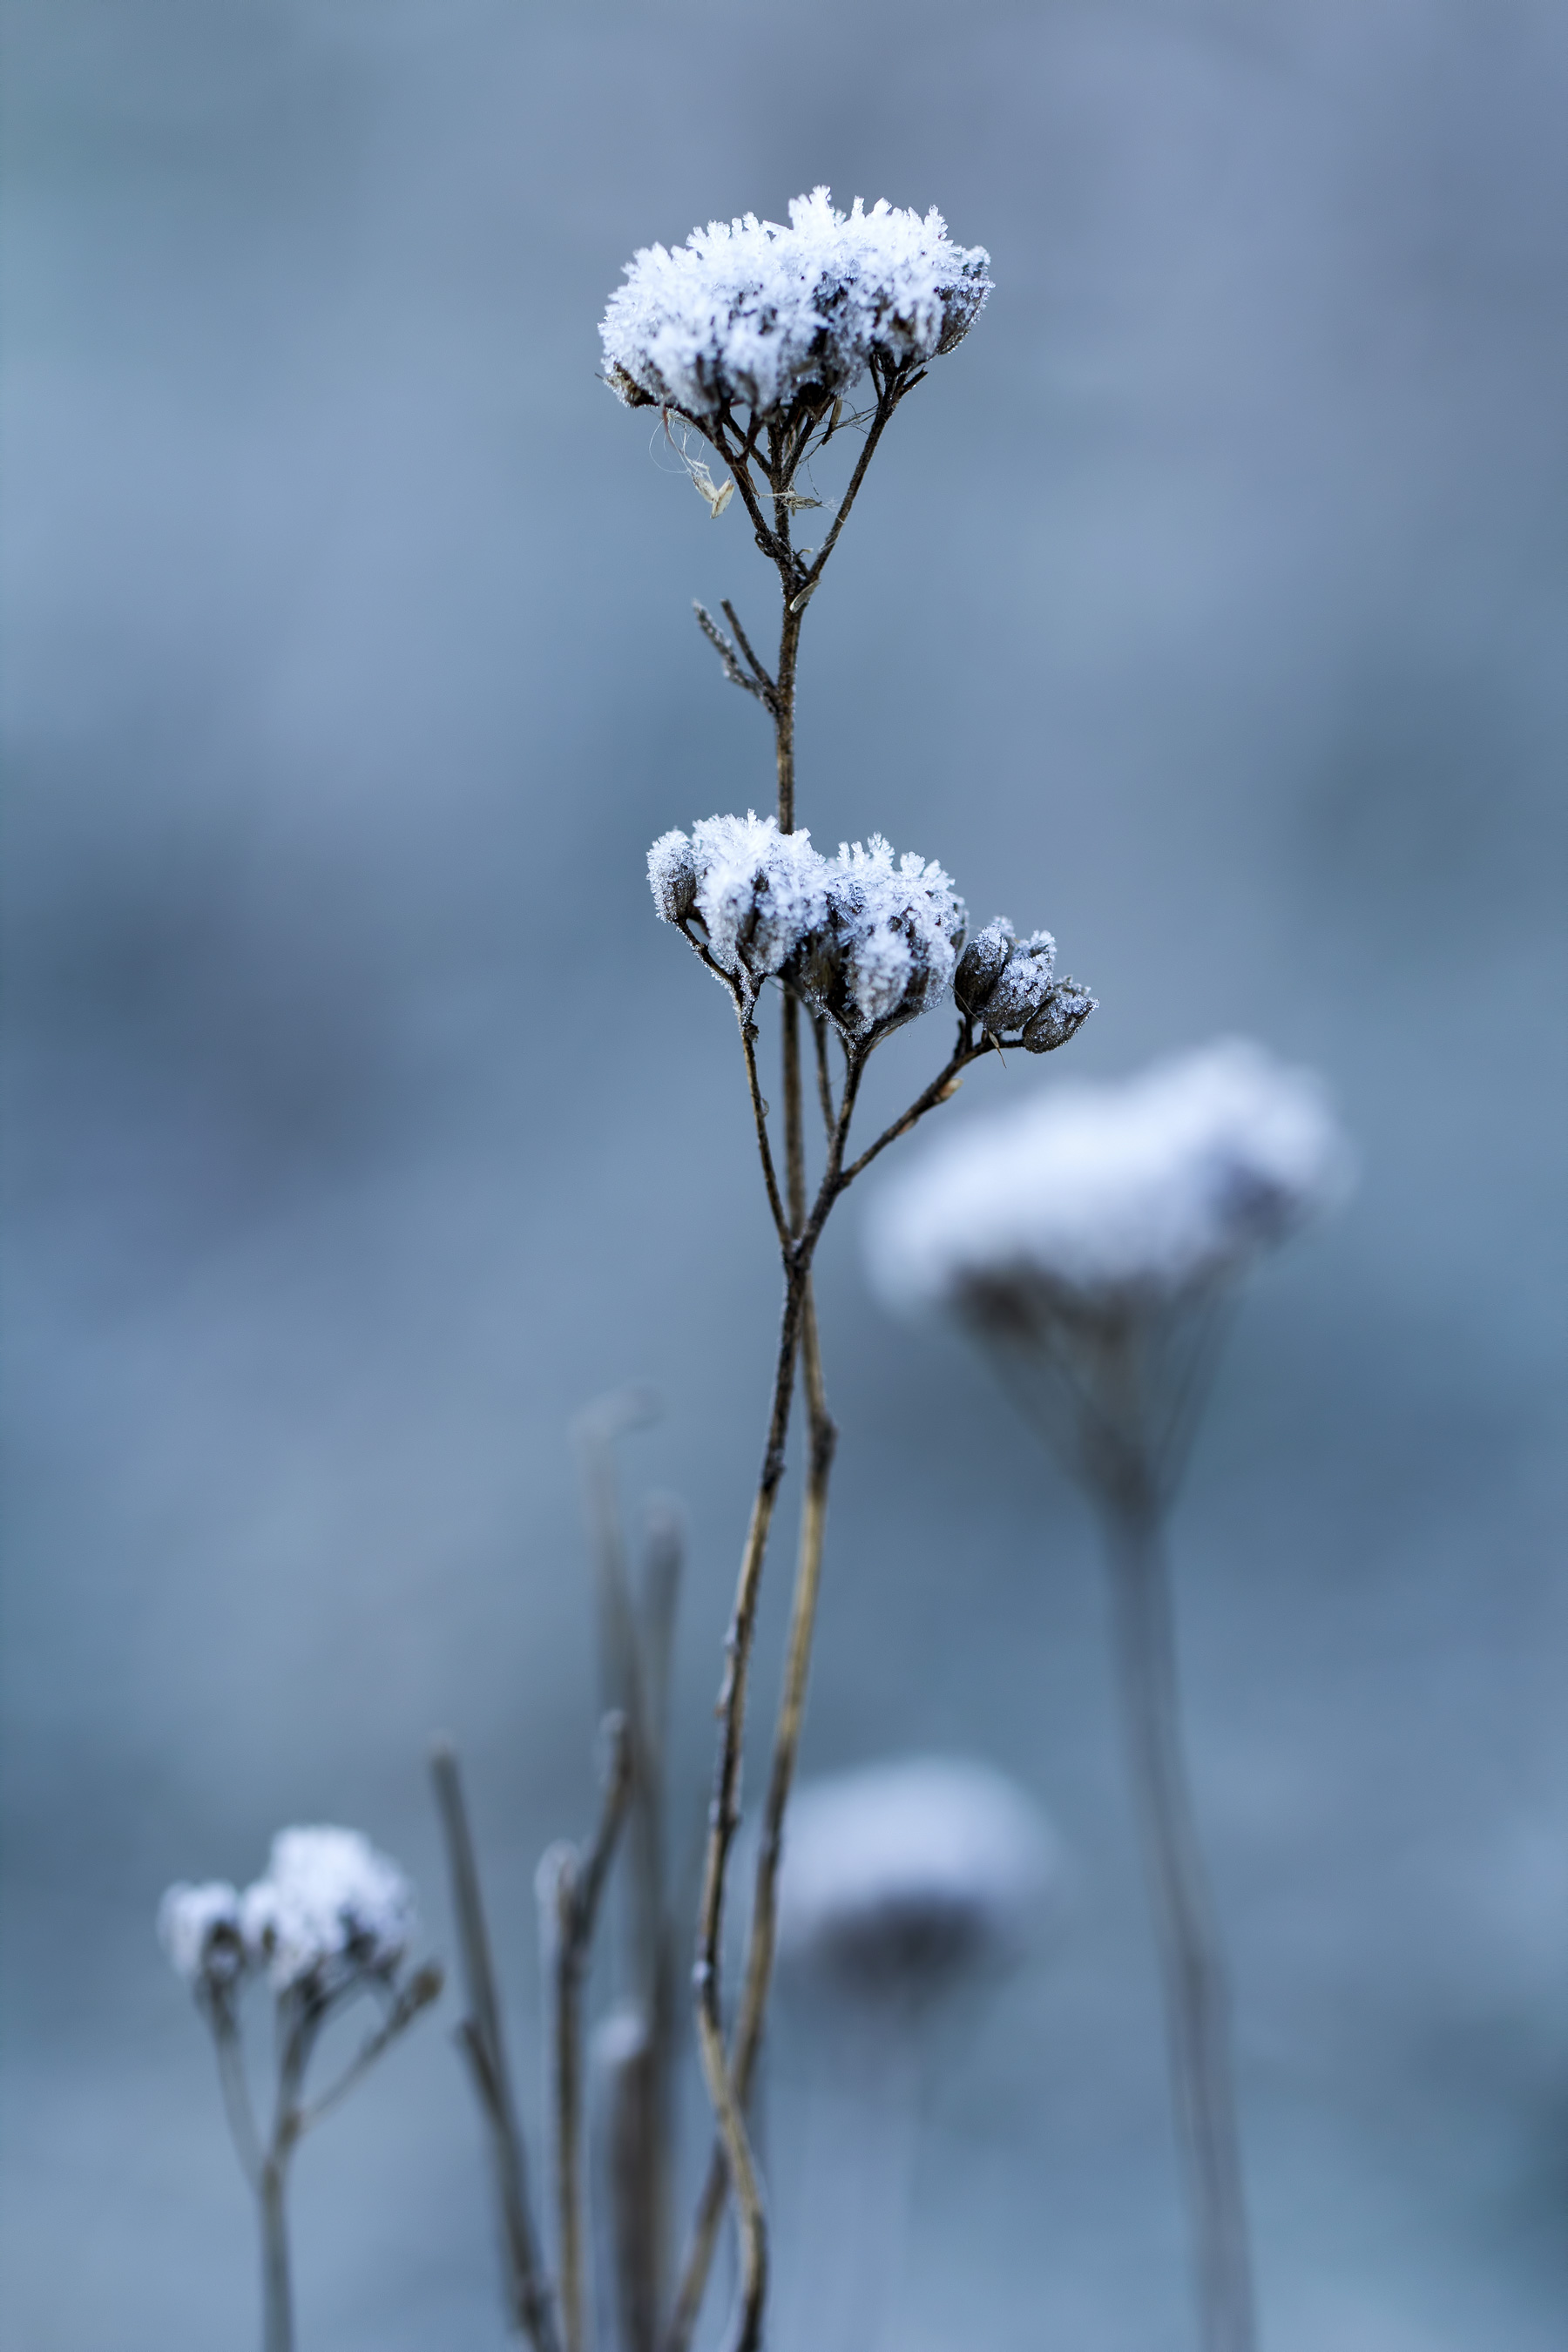 Icy plants on a field in winter